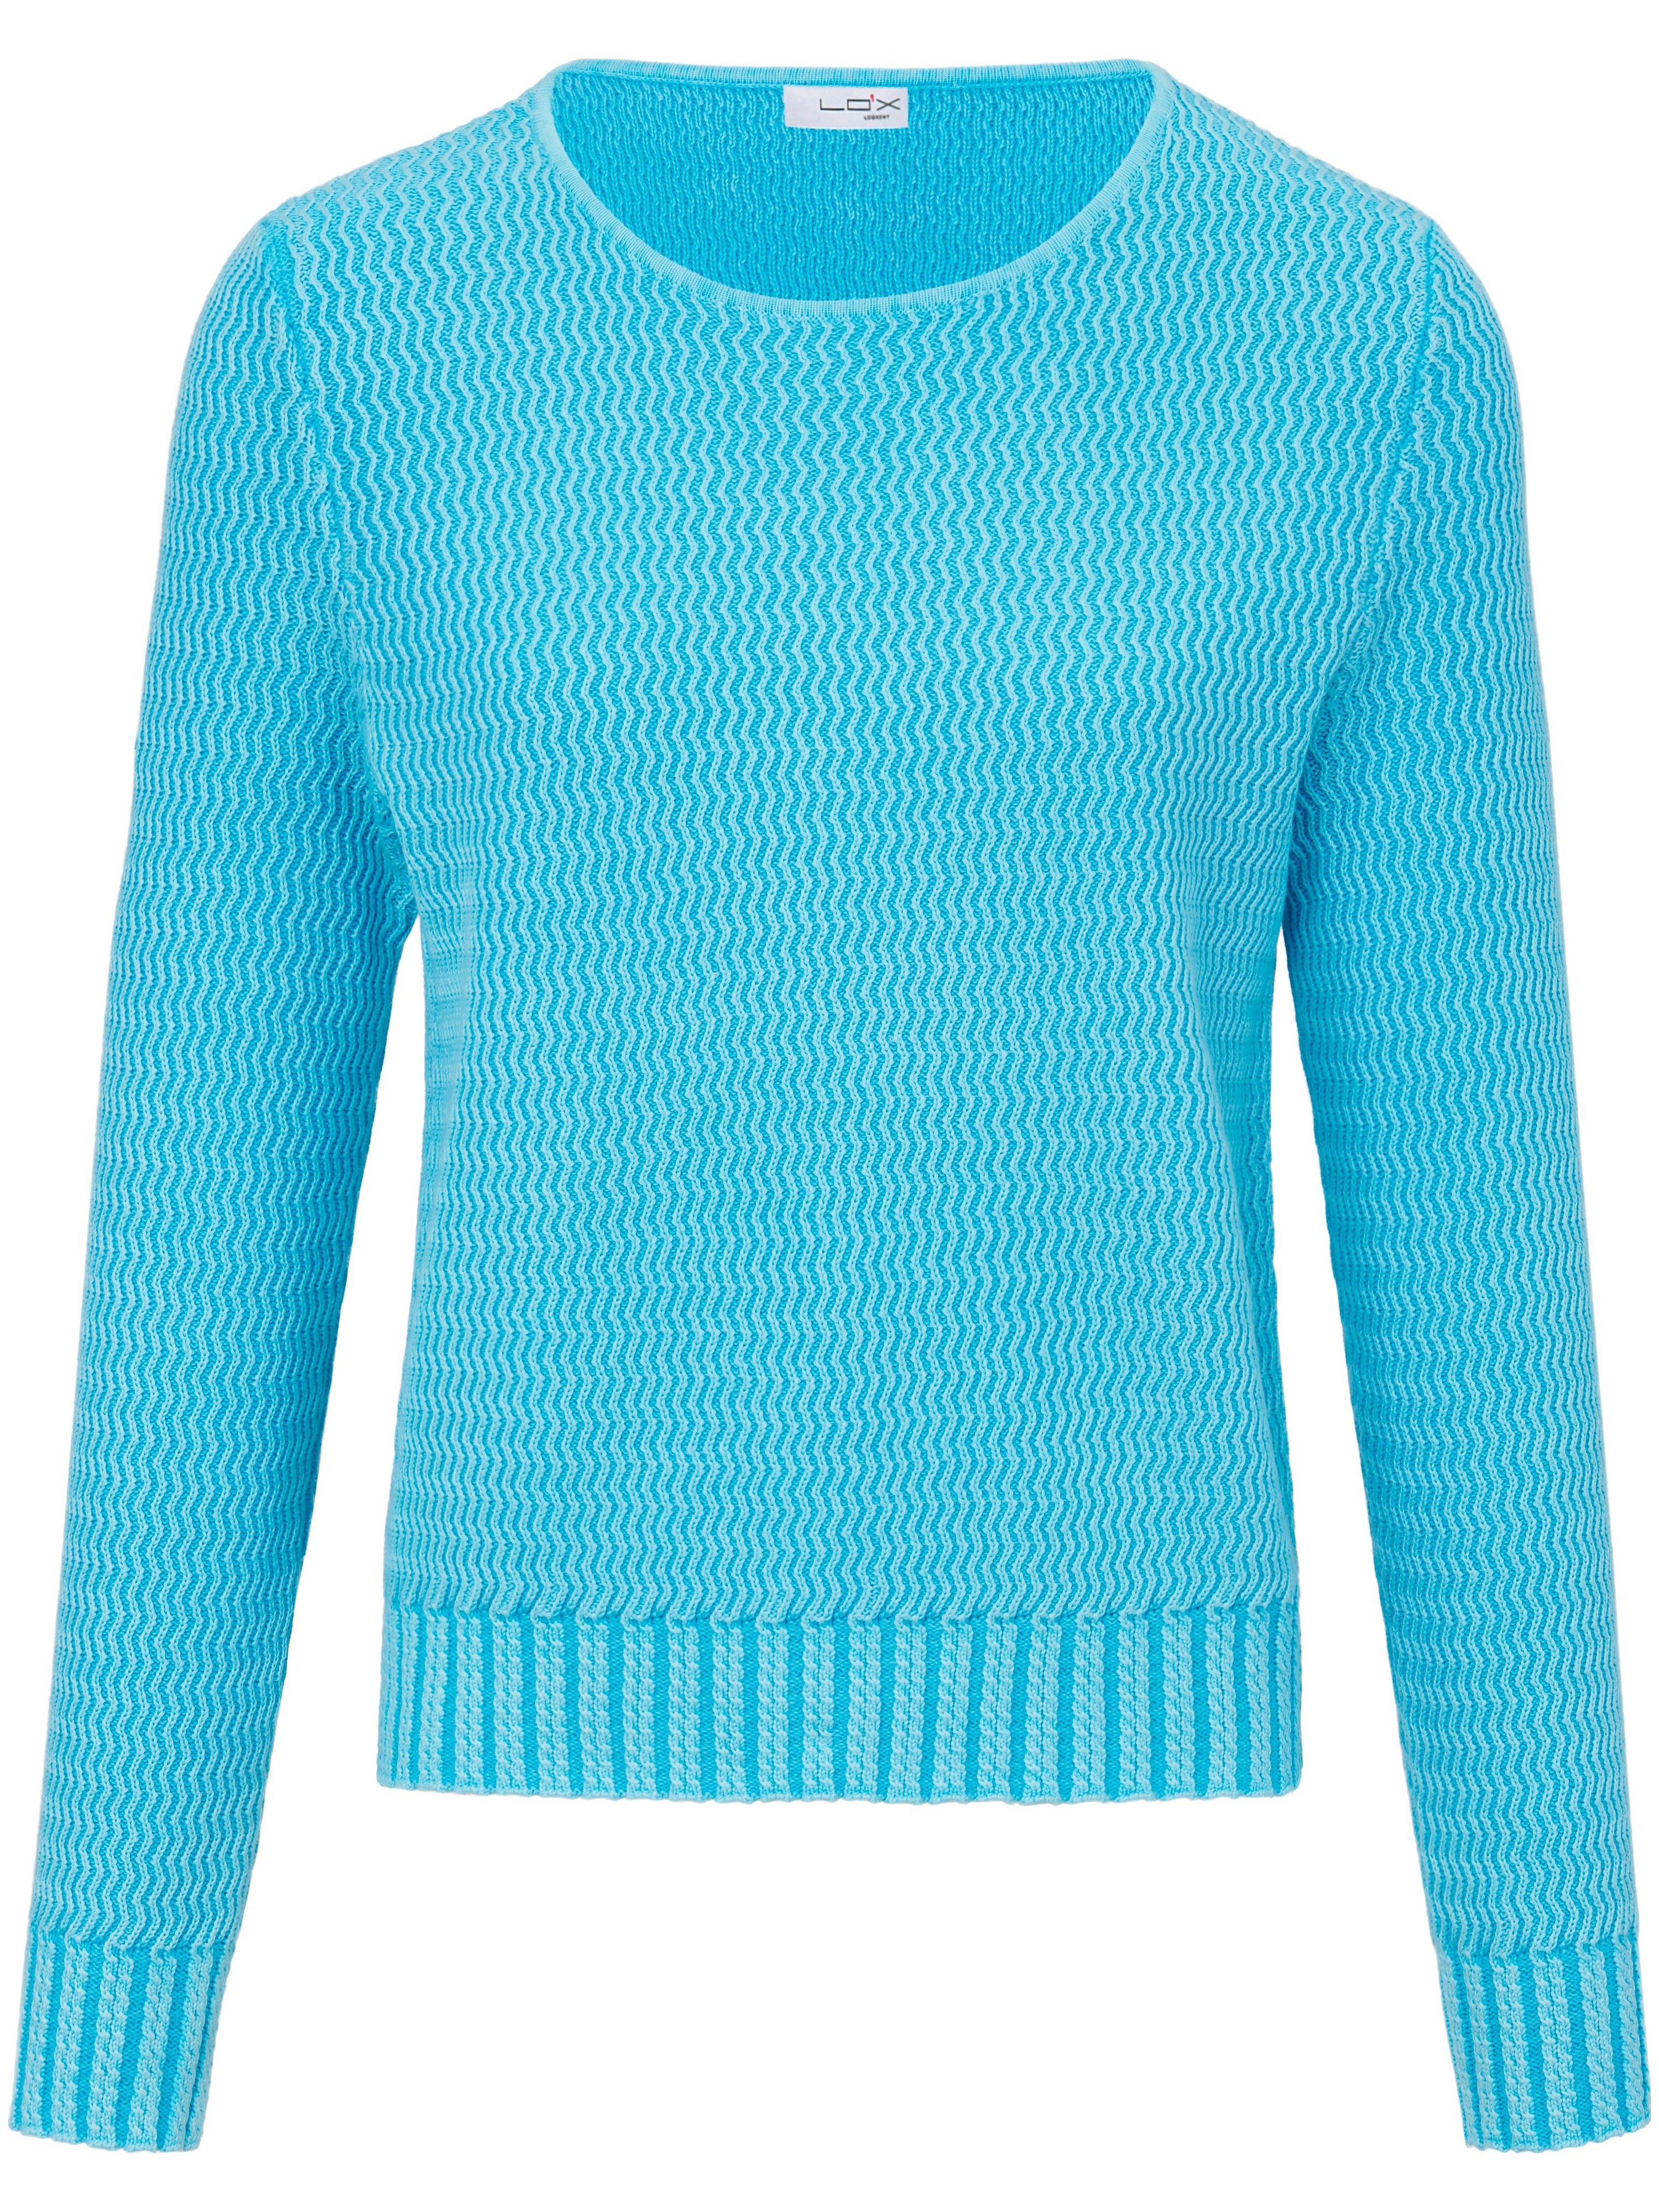 Le pull 100% coton  Looxent turquoise taille 38